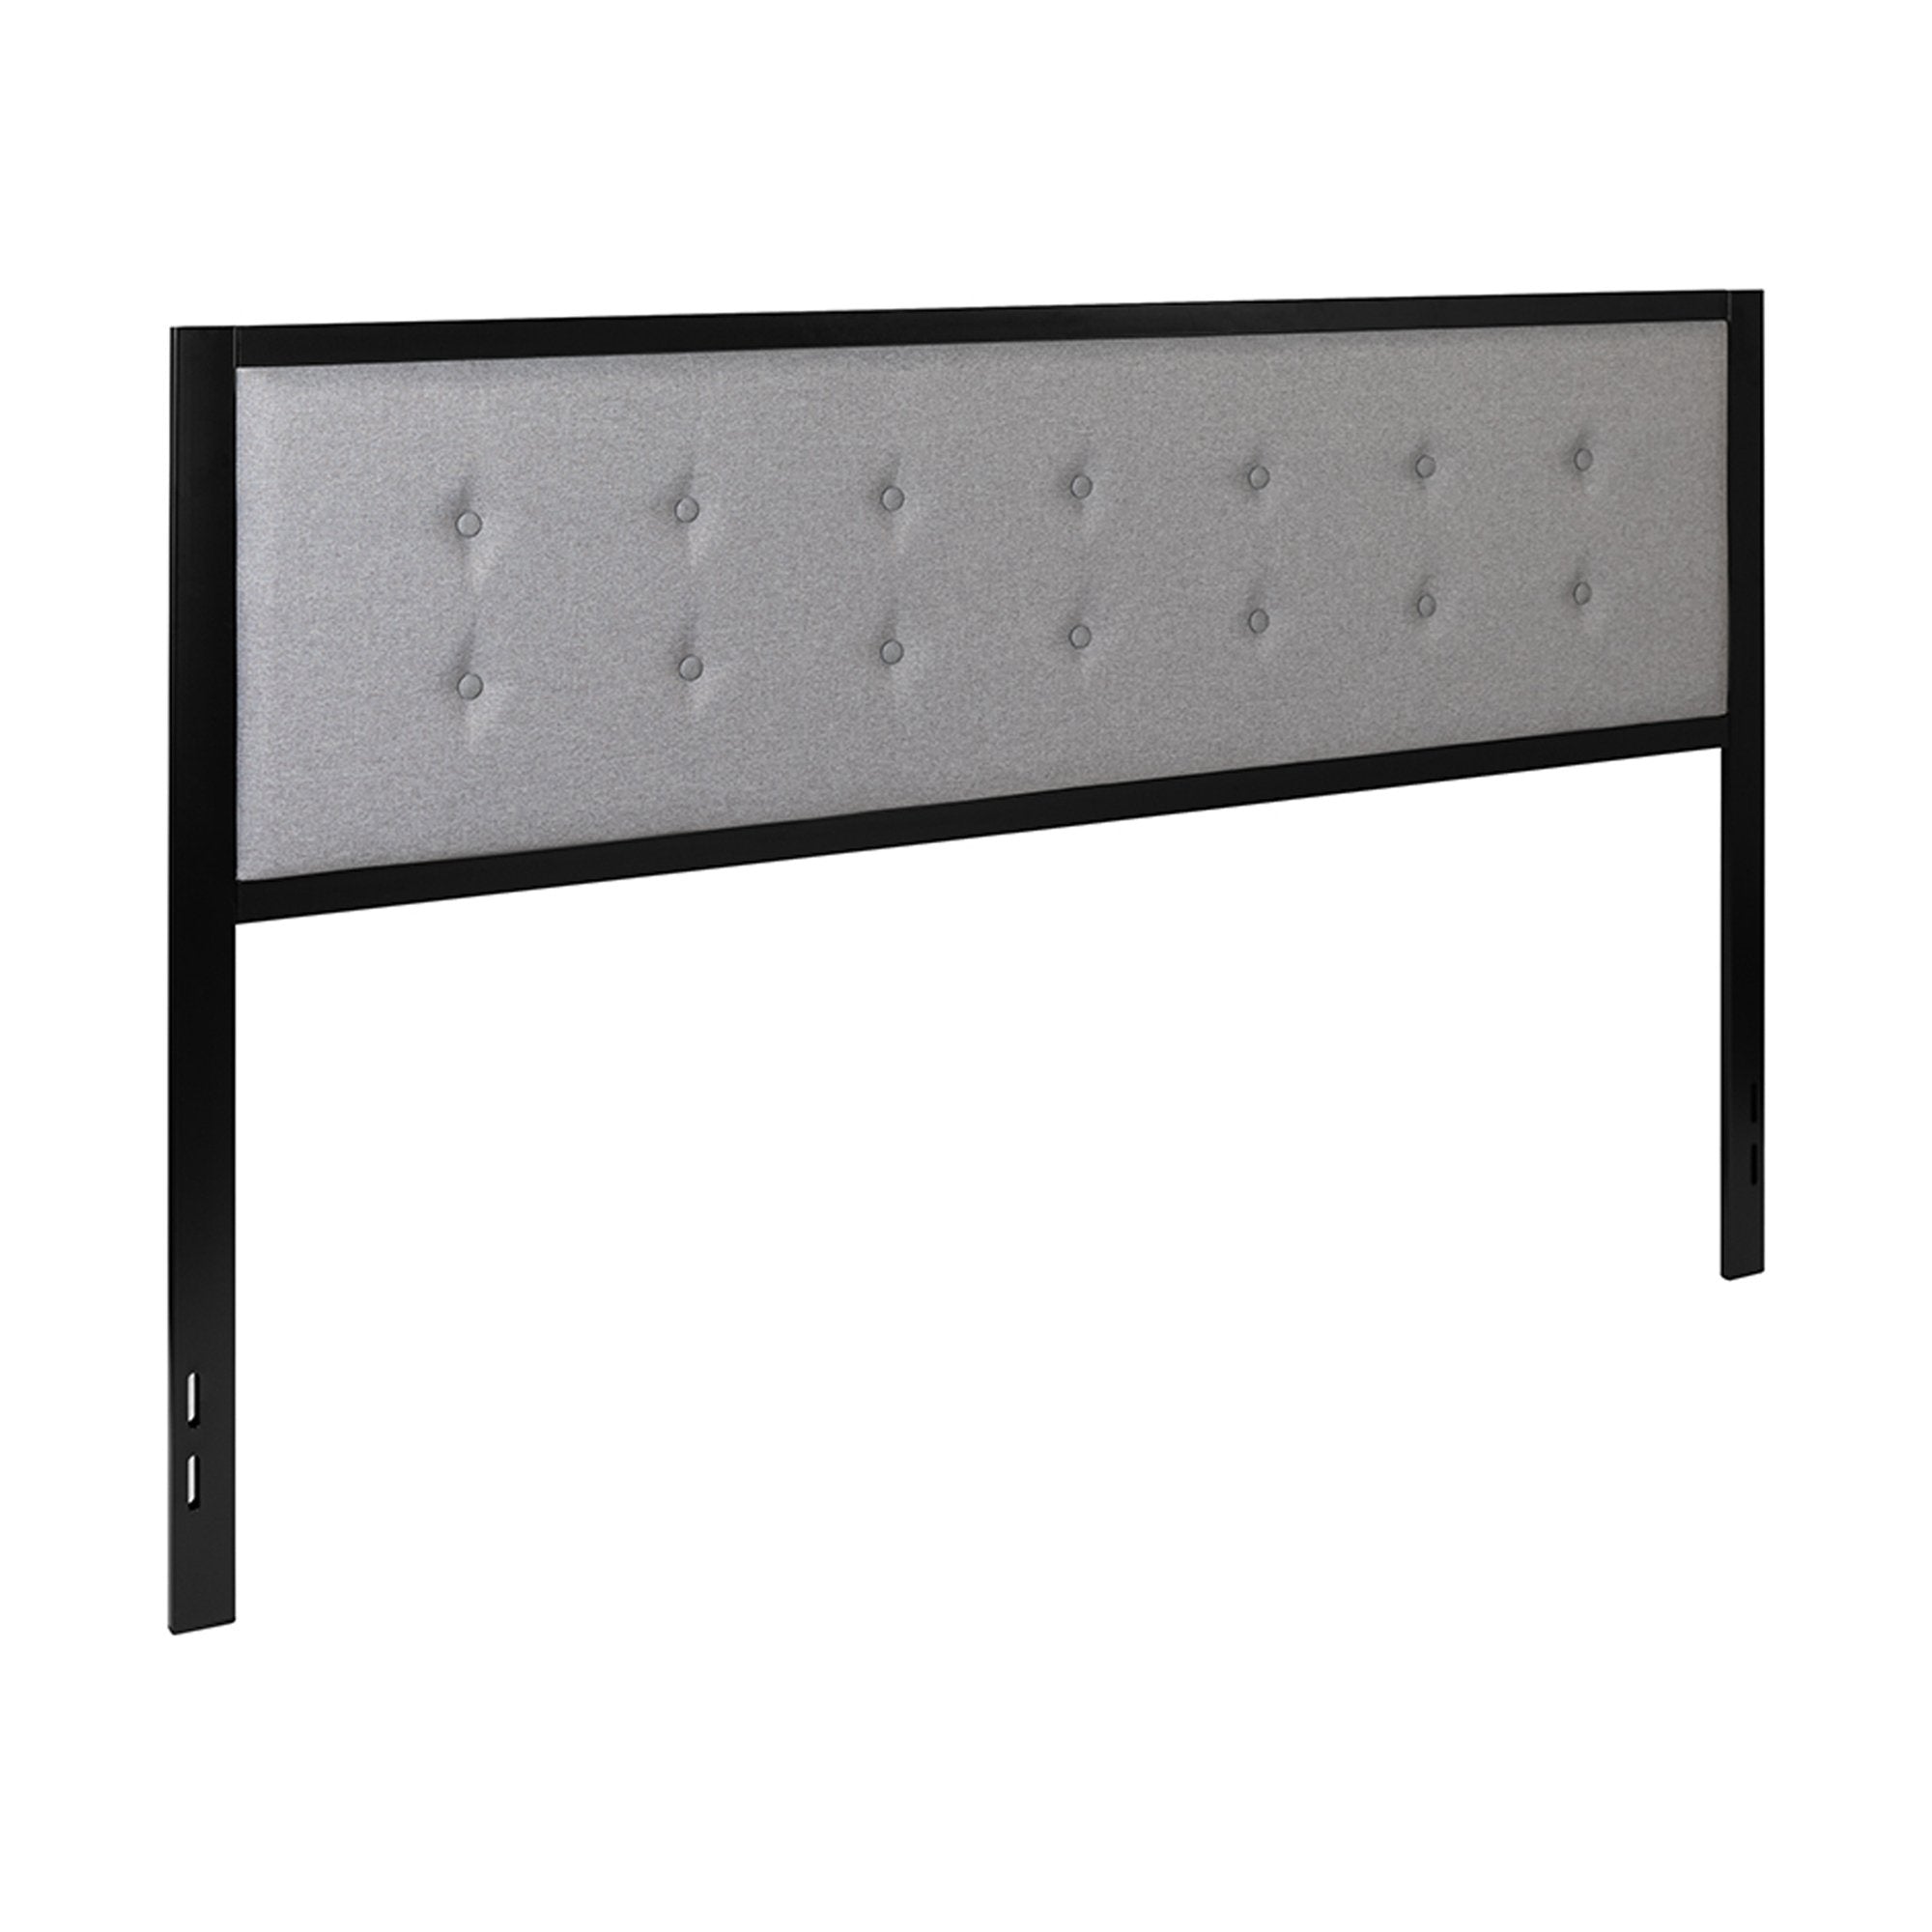 Bristol Metal Tufted Upholstered King Size Headboard in Light Gray